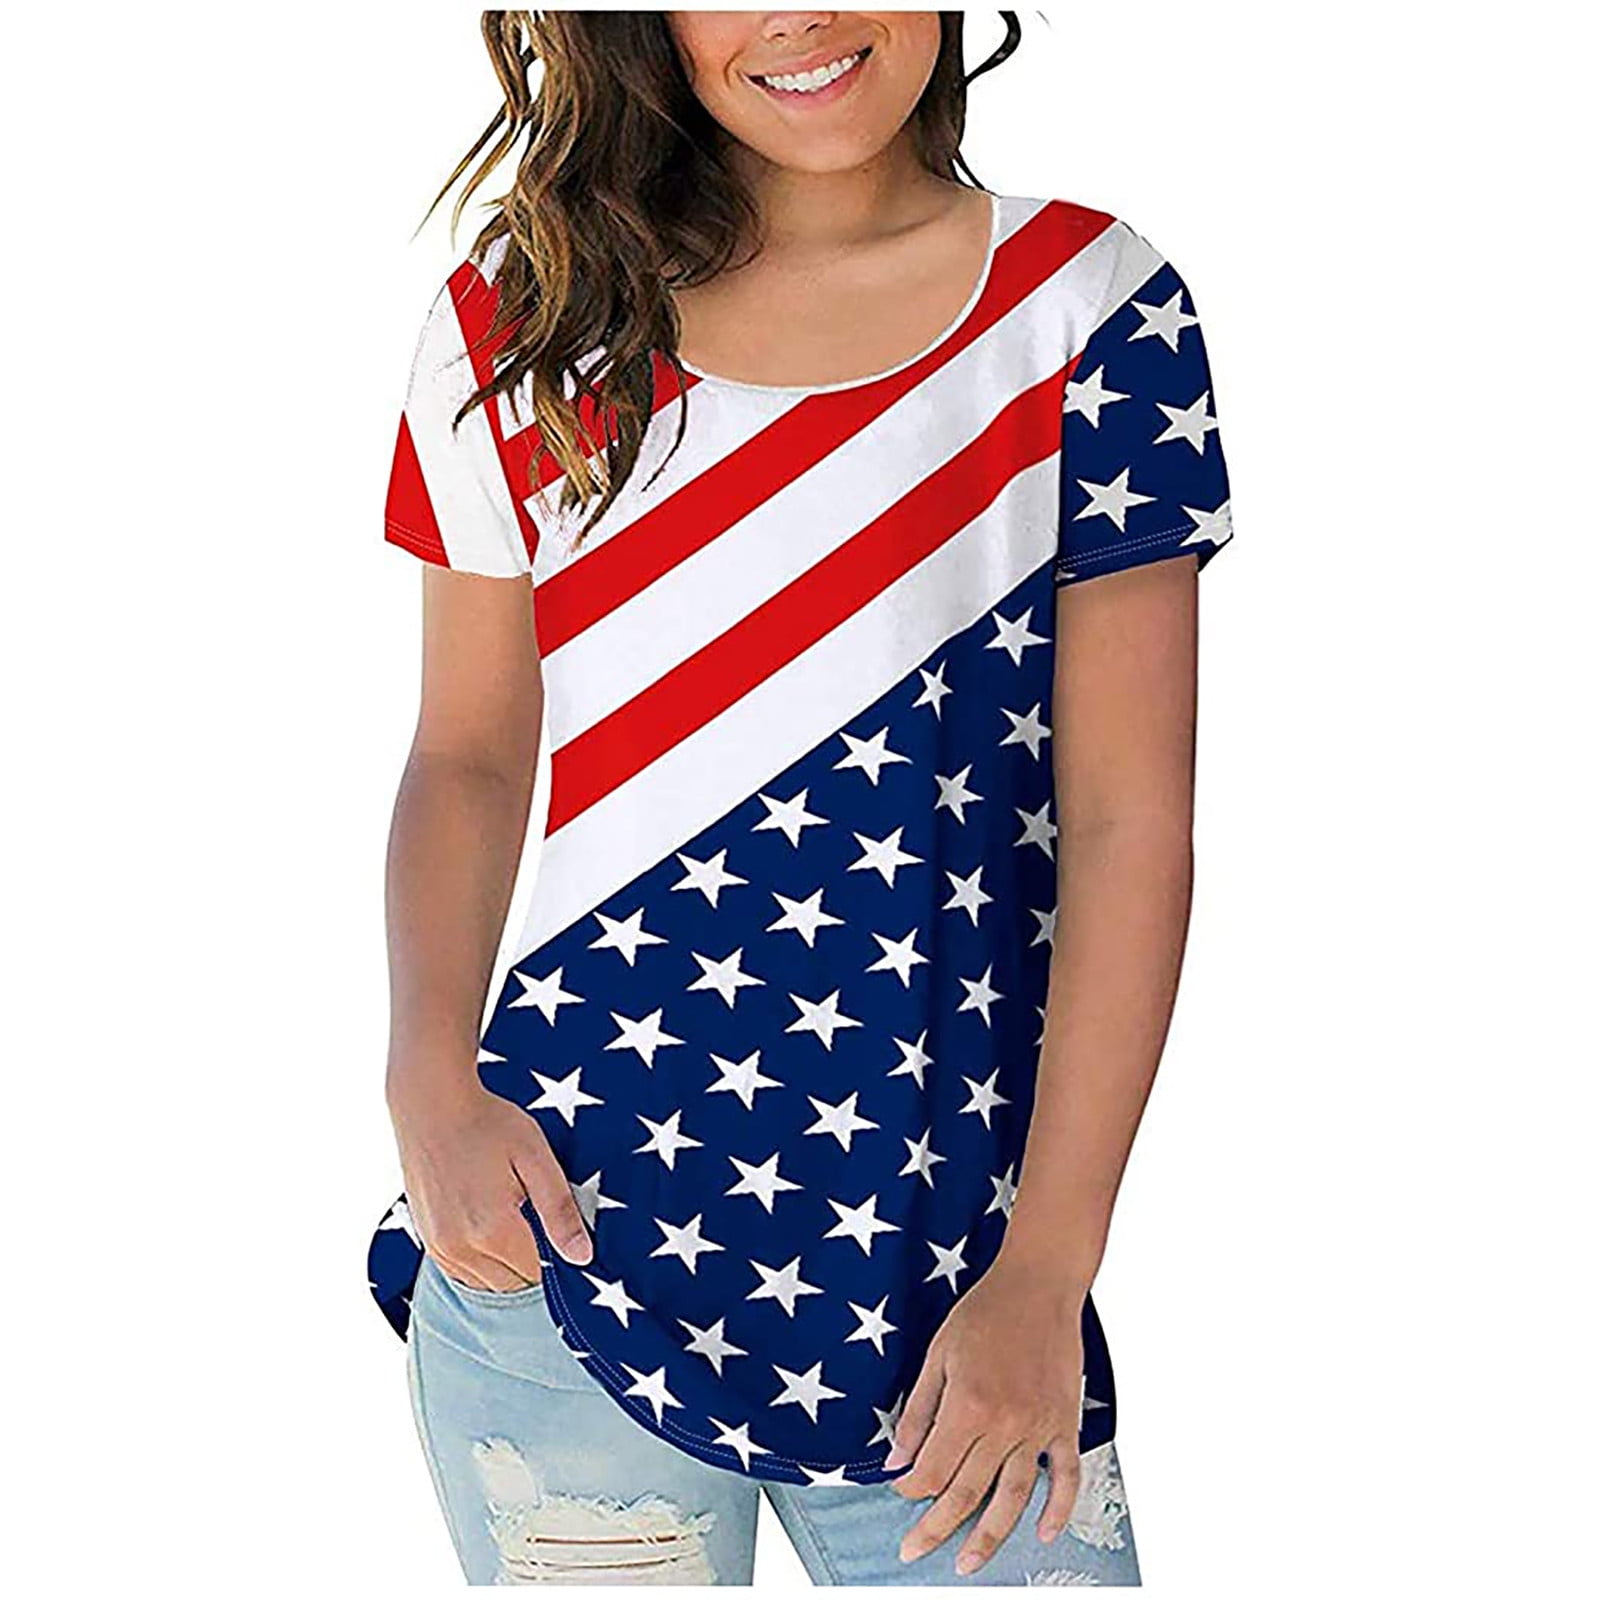 KEYEE 4th of July Shirts for Women,Summer American Flag Tee Stars Stripes Patriotic Tops Short Sleeve Tunic T-Shirts Blouse 